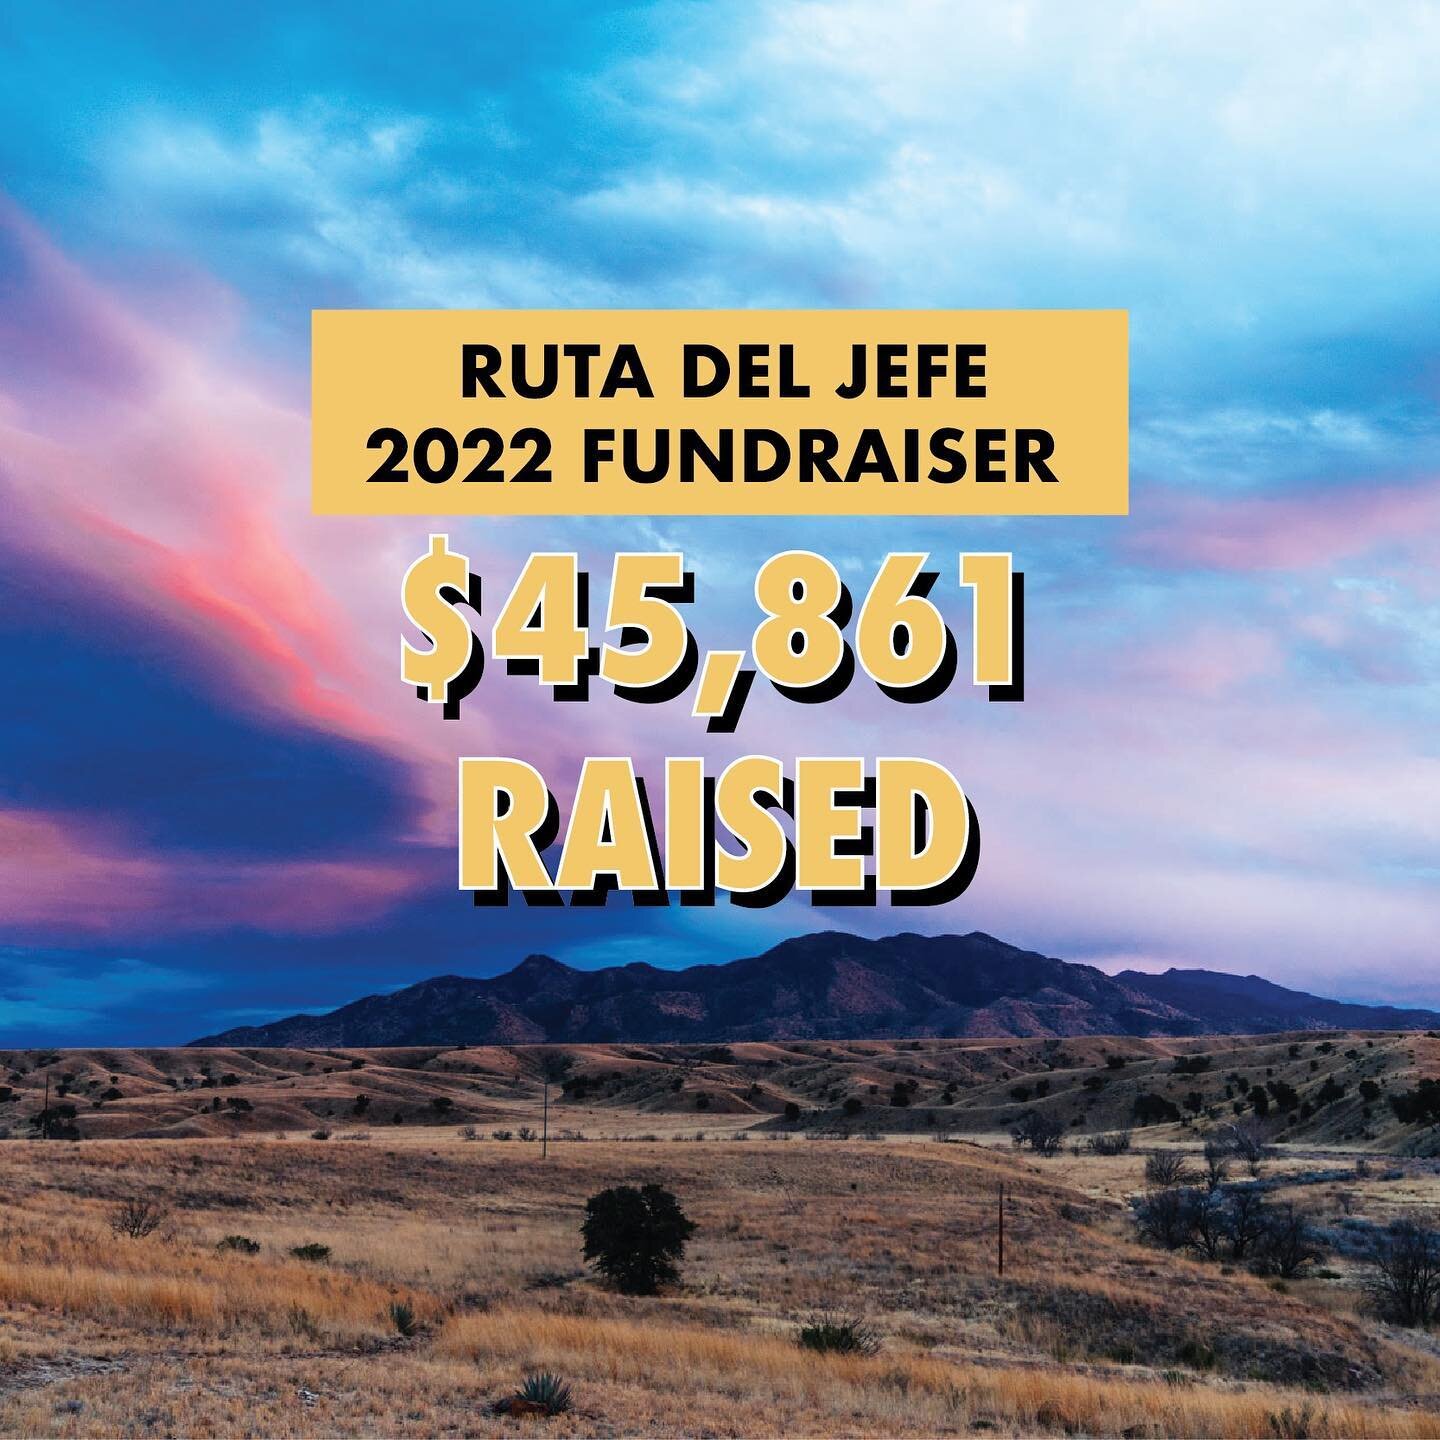 Yesterday we wrapped up the #rutadeljefe fundraiser. A small community of 150 folks exceeded RDJ&rsquo;s original goal of $30,000 by collectively fundraising ✨$45,861 ✨ for @indivisibletohono , @awrr_audubon , Save the Scenic Santa Ritas, @nomoredeat